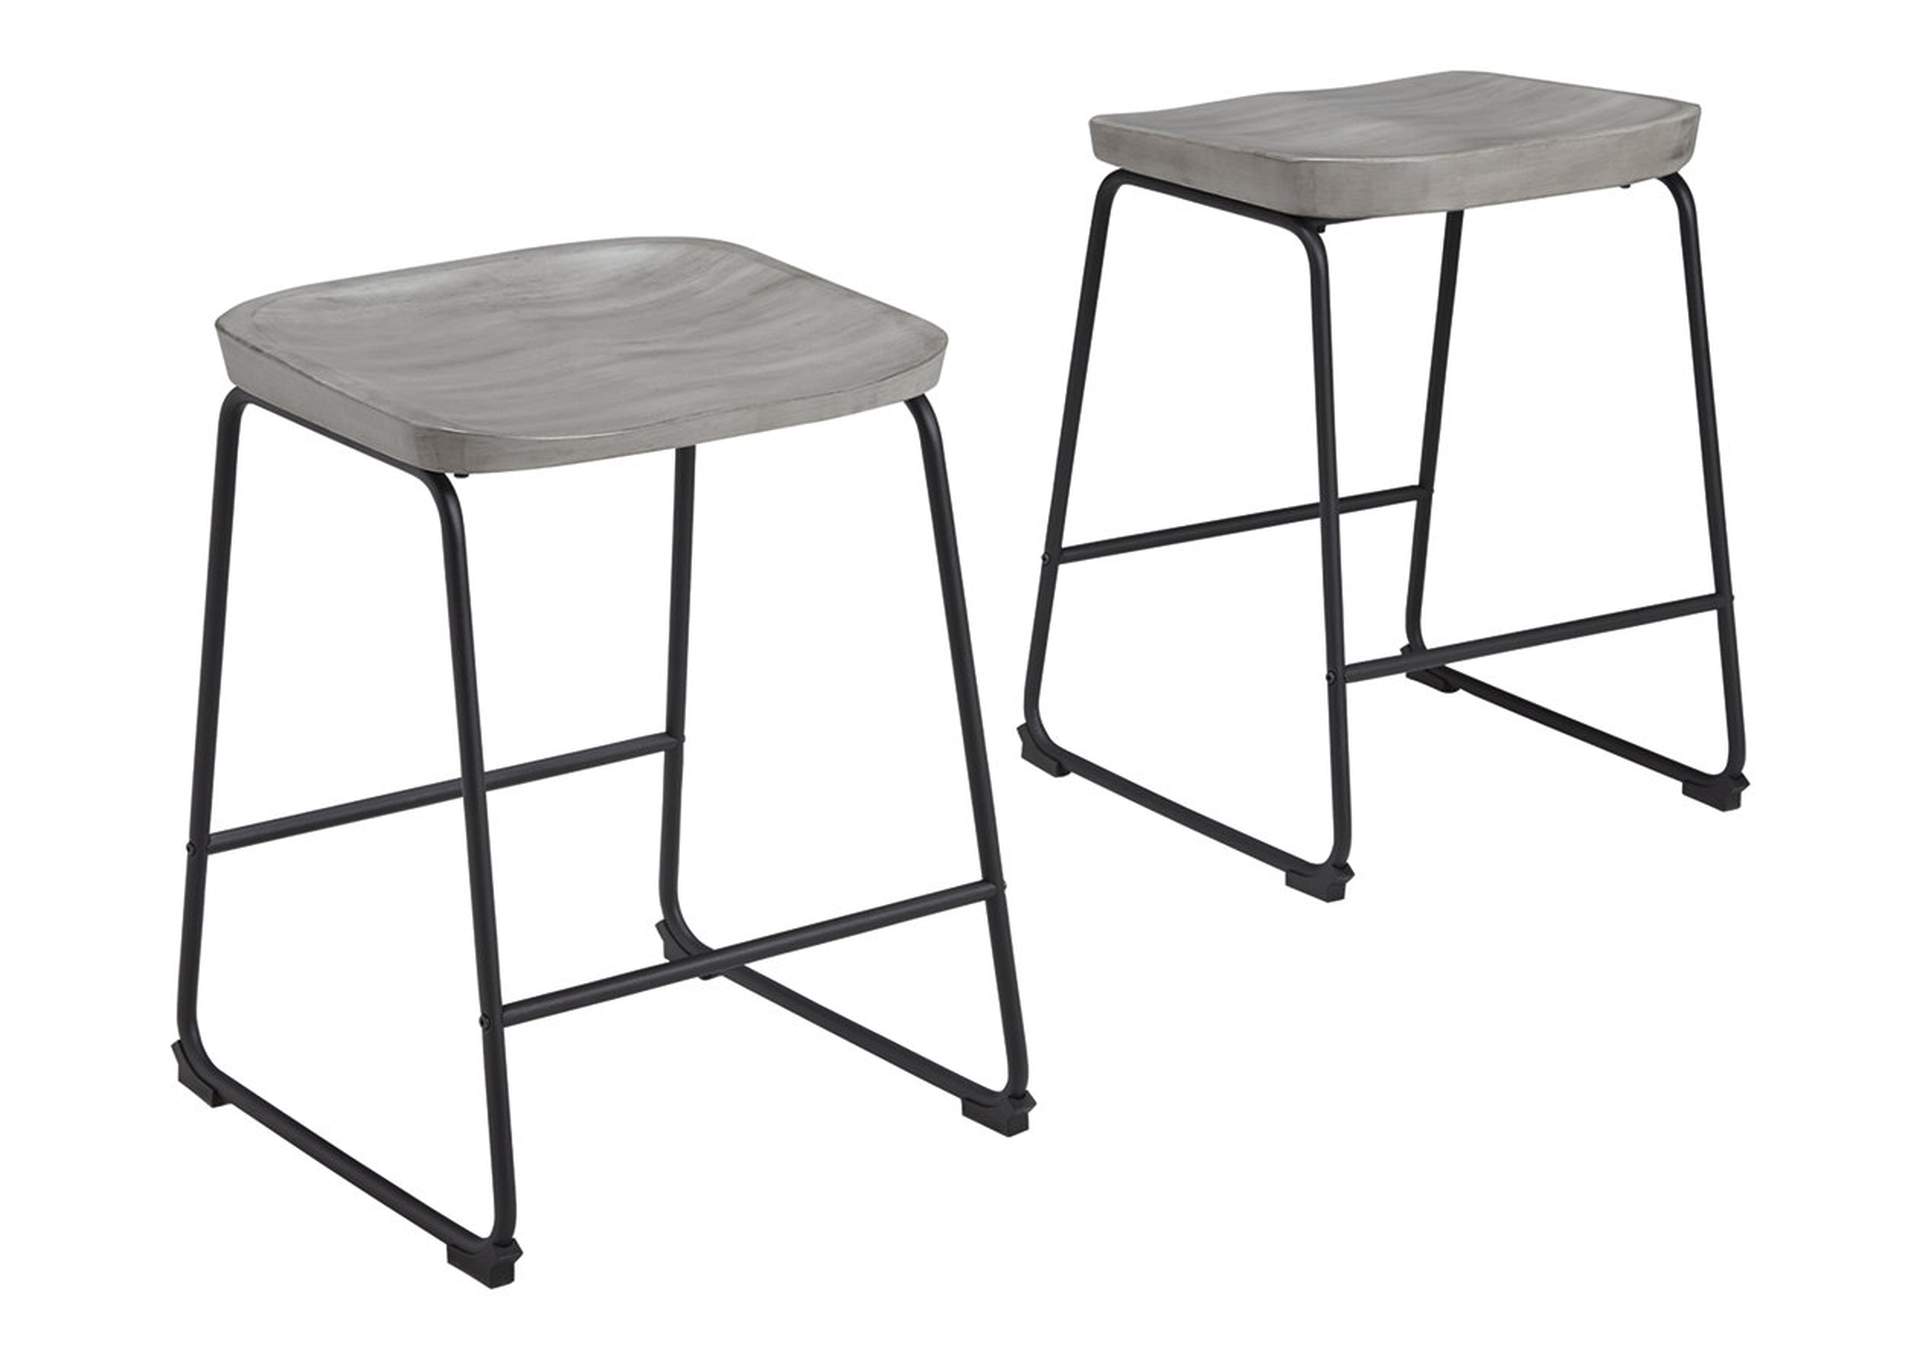 Showdell Counter Height Bar Stool Ashley Furniture Homestore Independently Owned And Operated By Homemart Sociedad Anonima